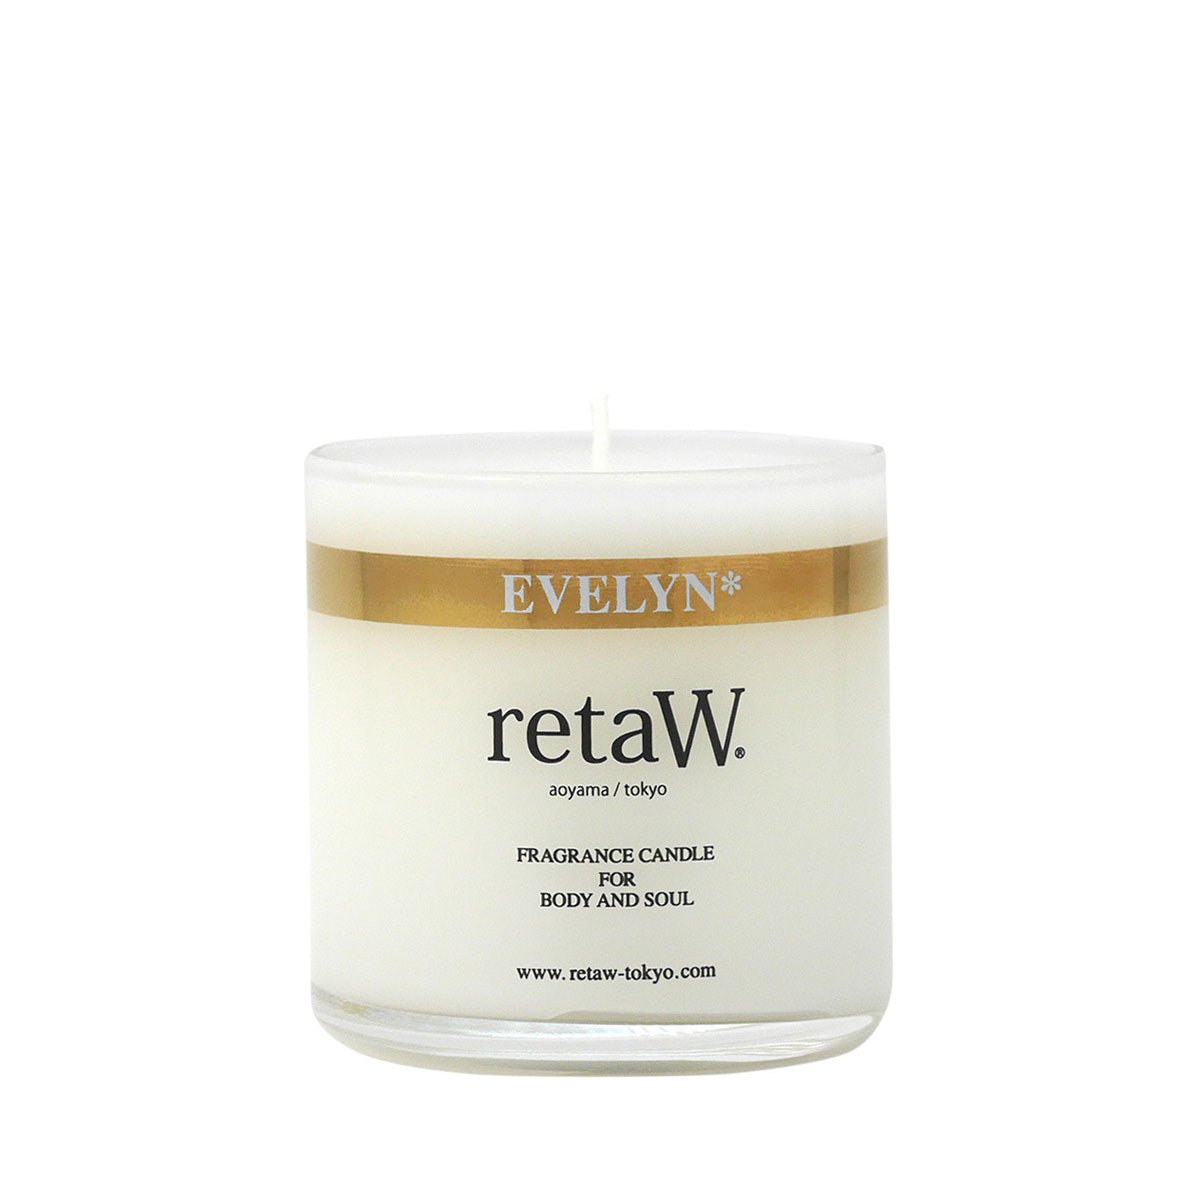 Image of retaW Fragrance Candle Evelyn